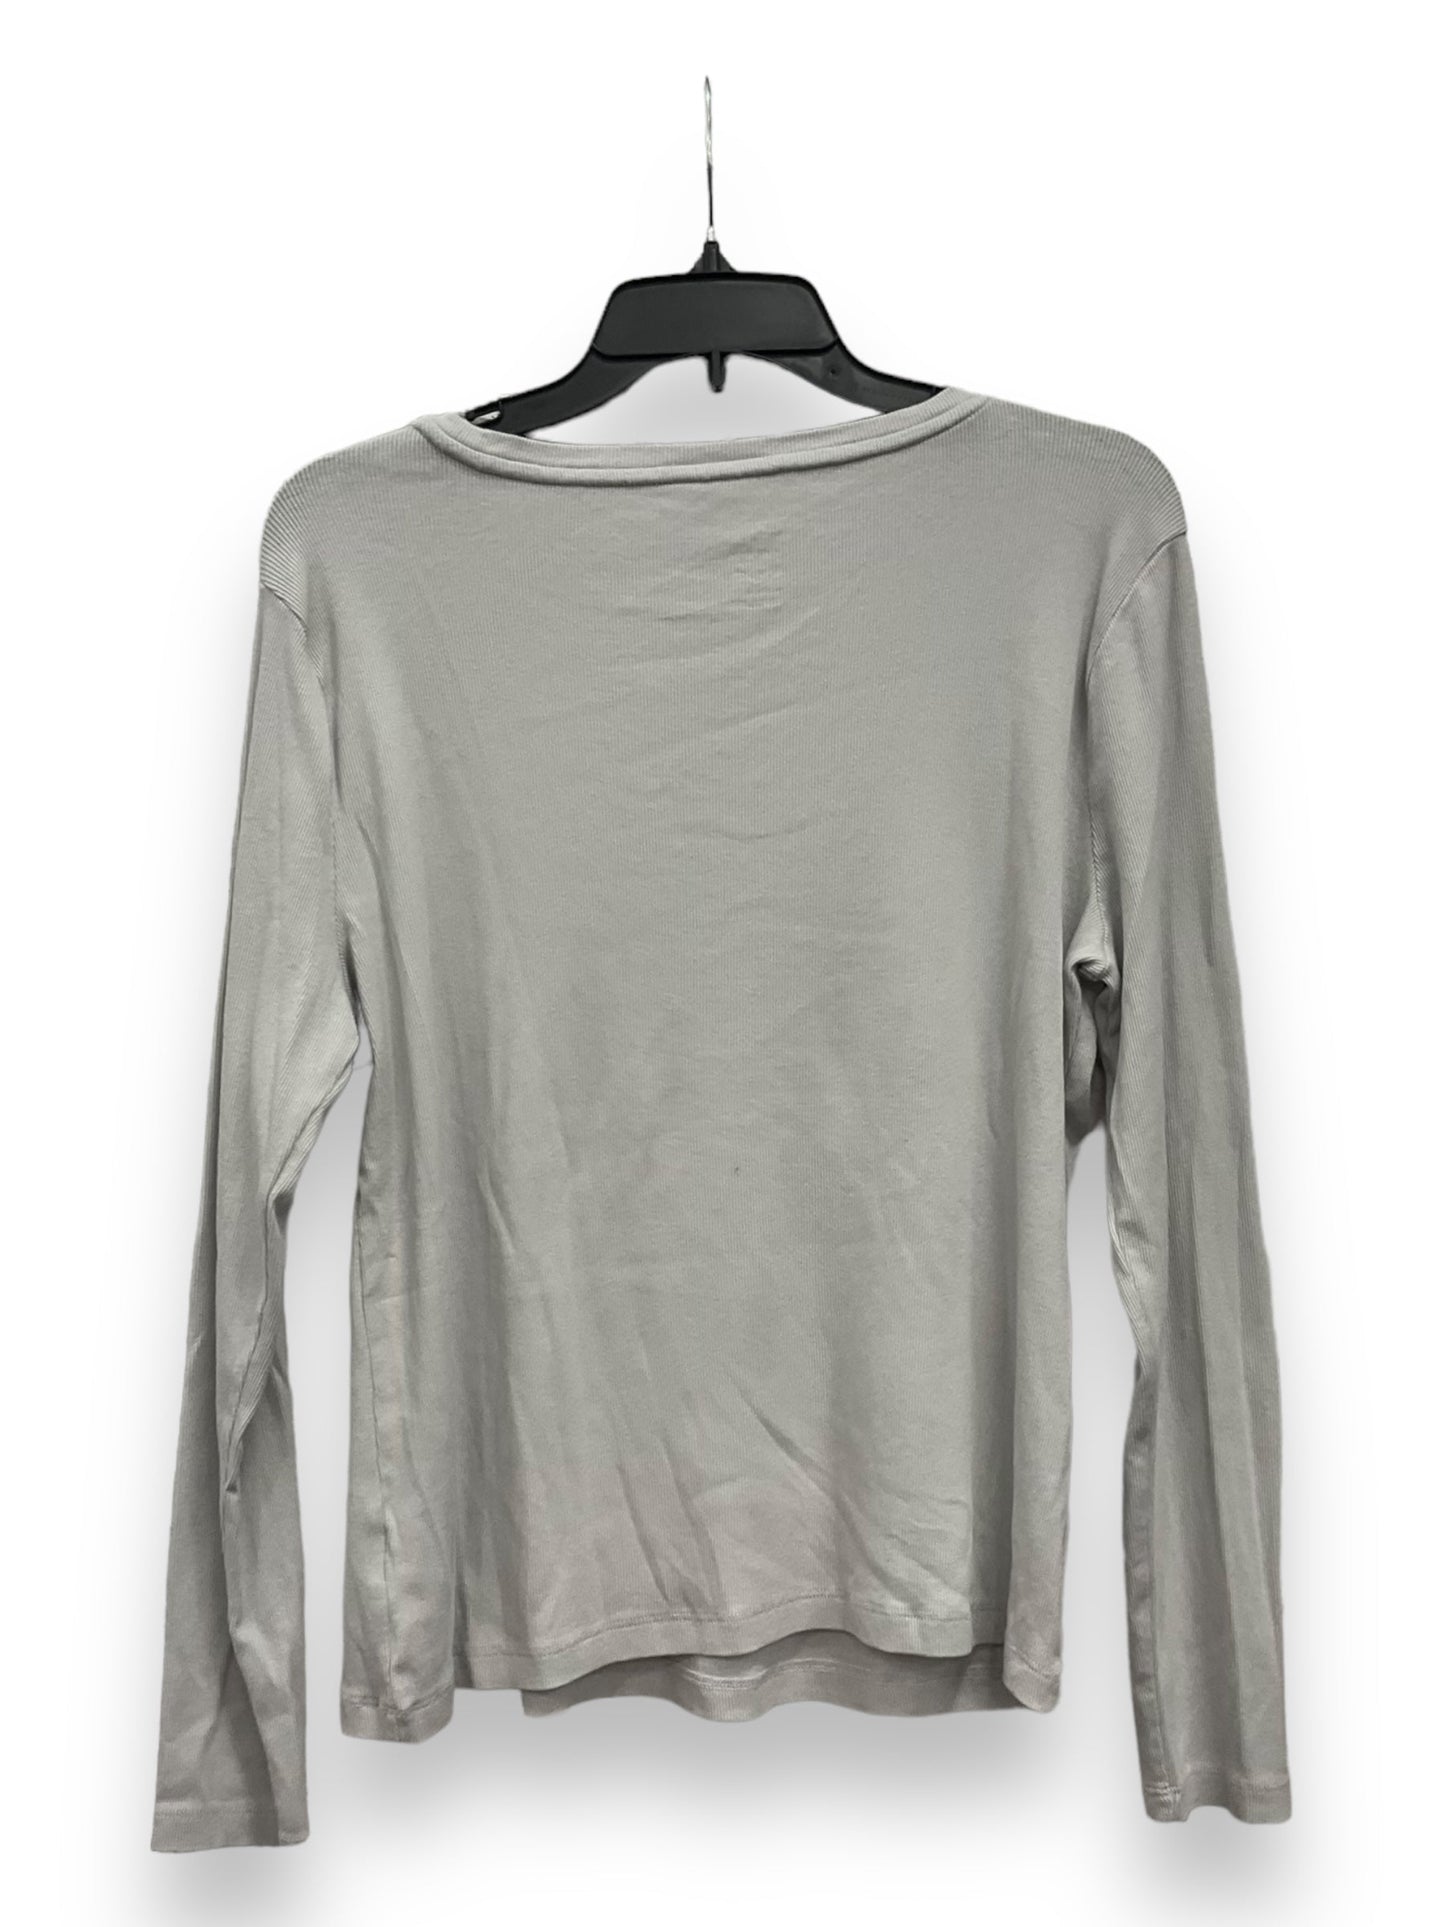 Grey Top Long Sleeve A New Day, Size Xl